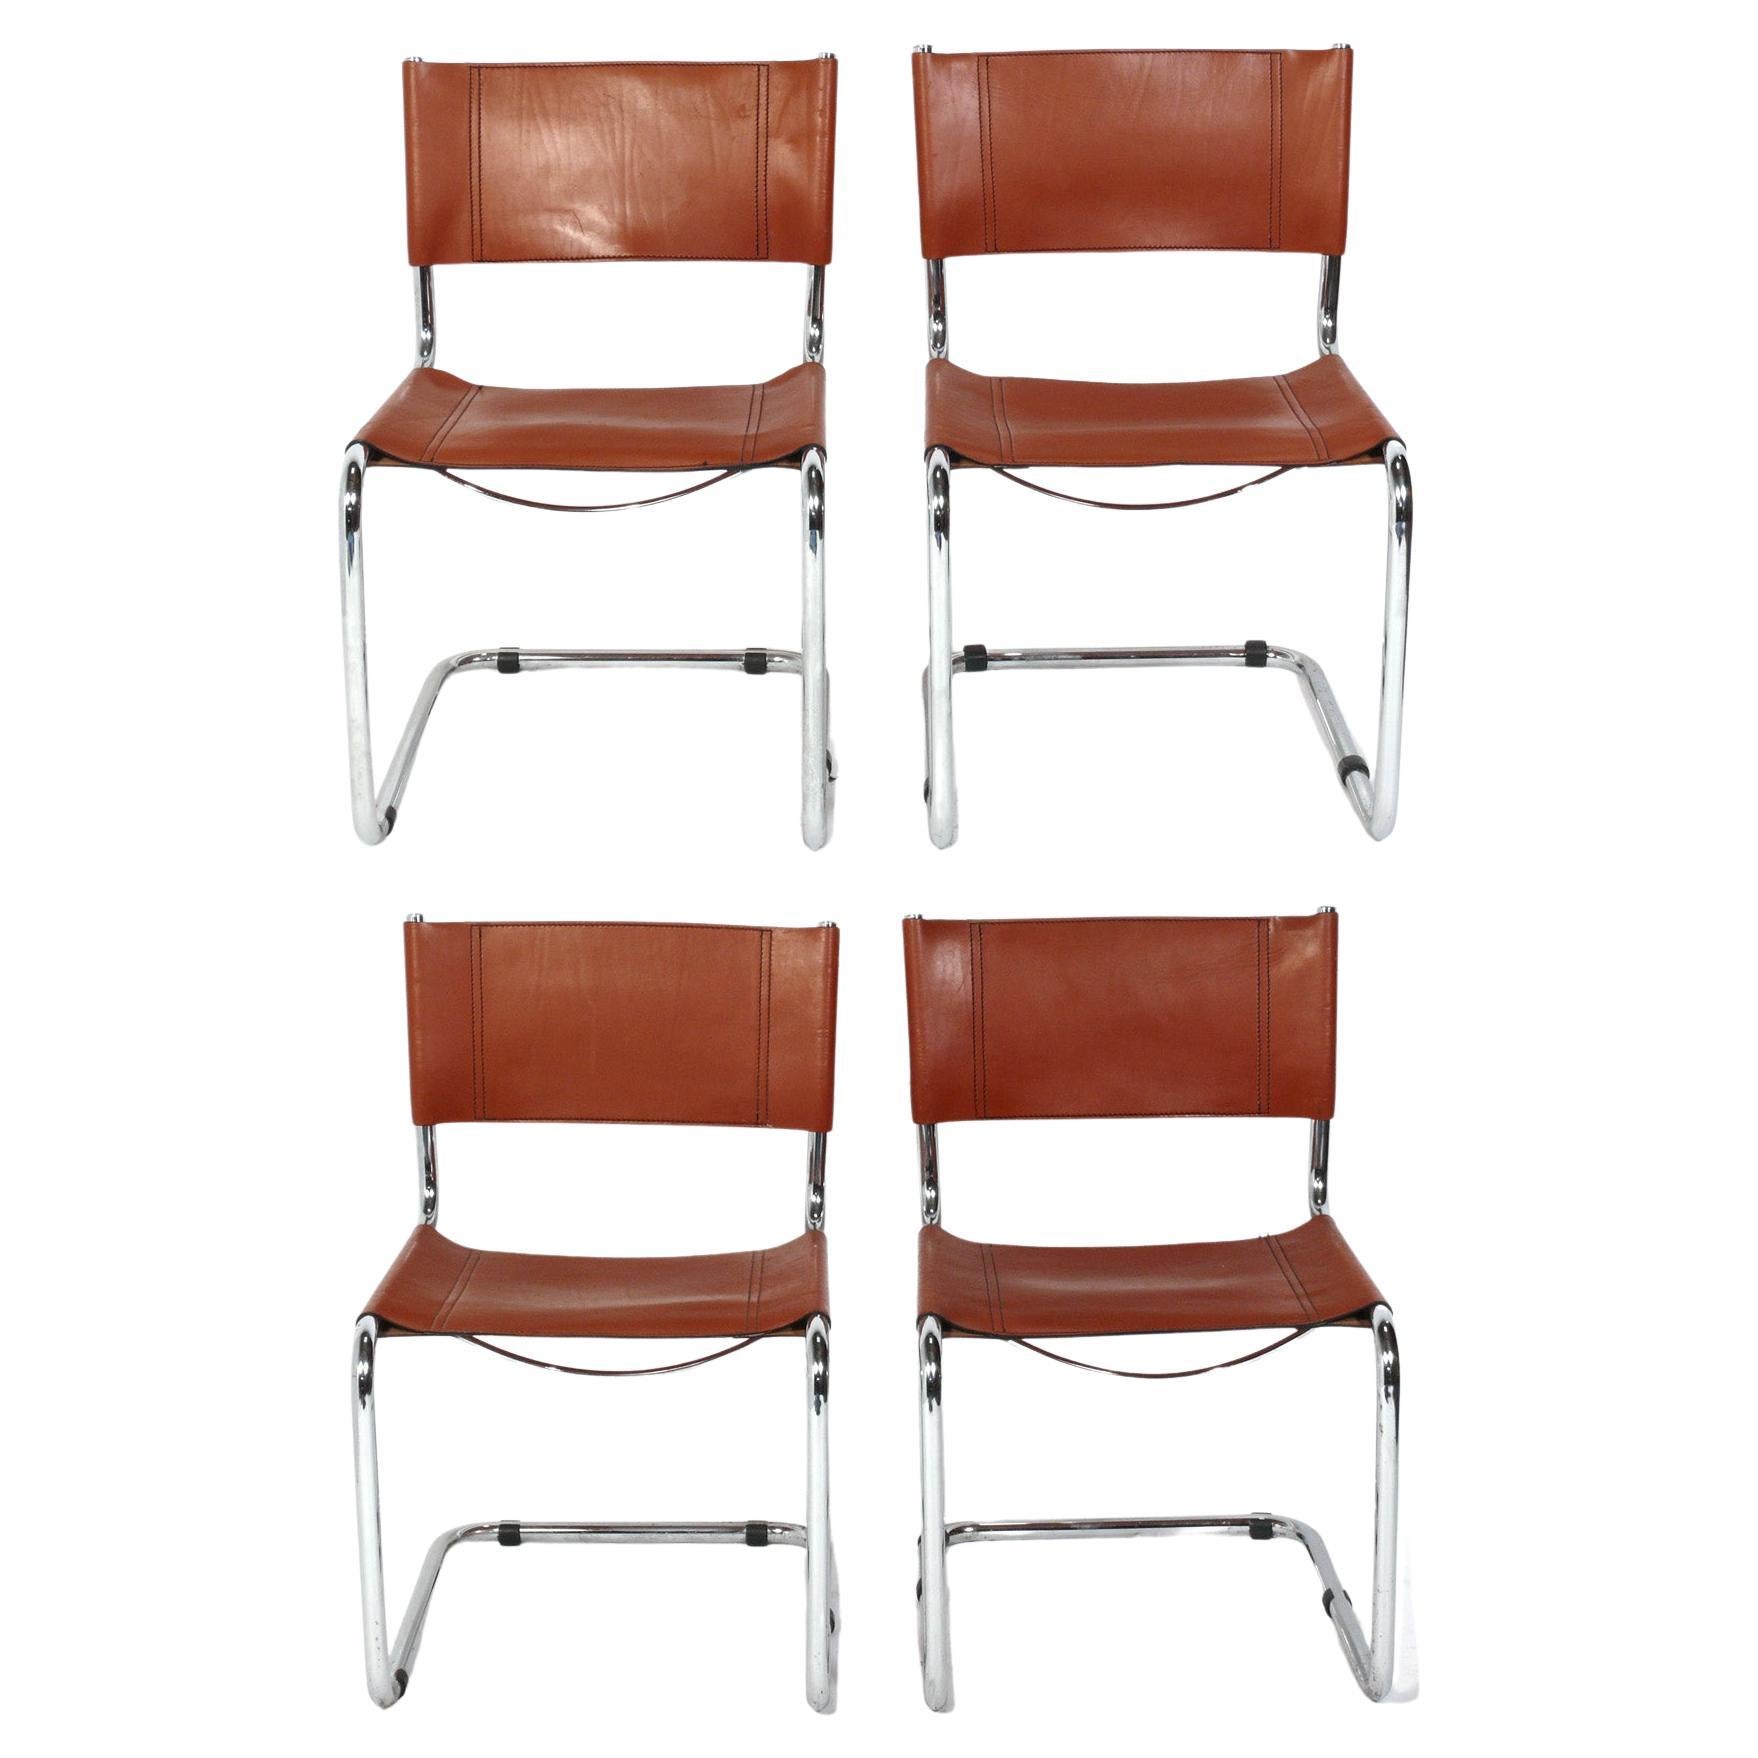 Mart Stam Cognac Leather and Chrome Dining Chairs for Thonet